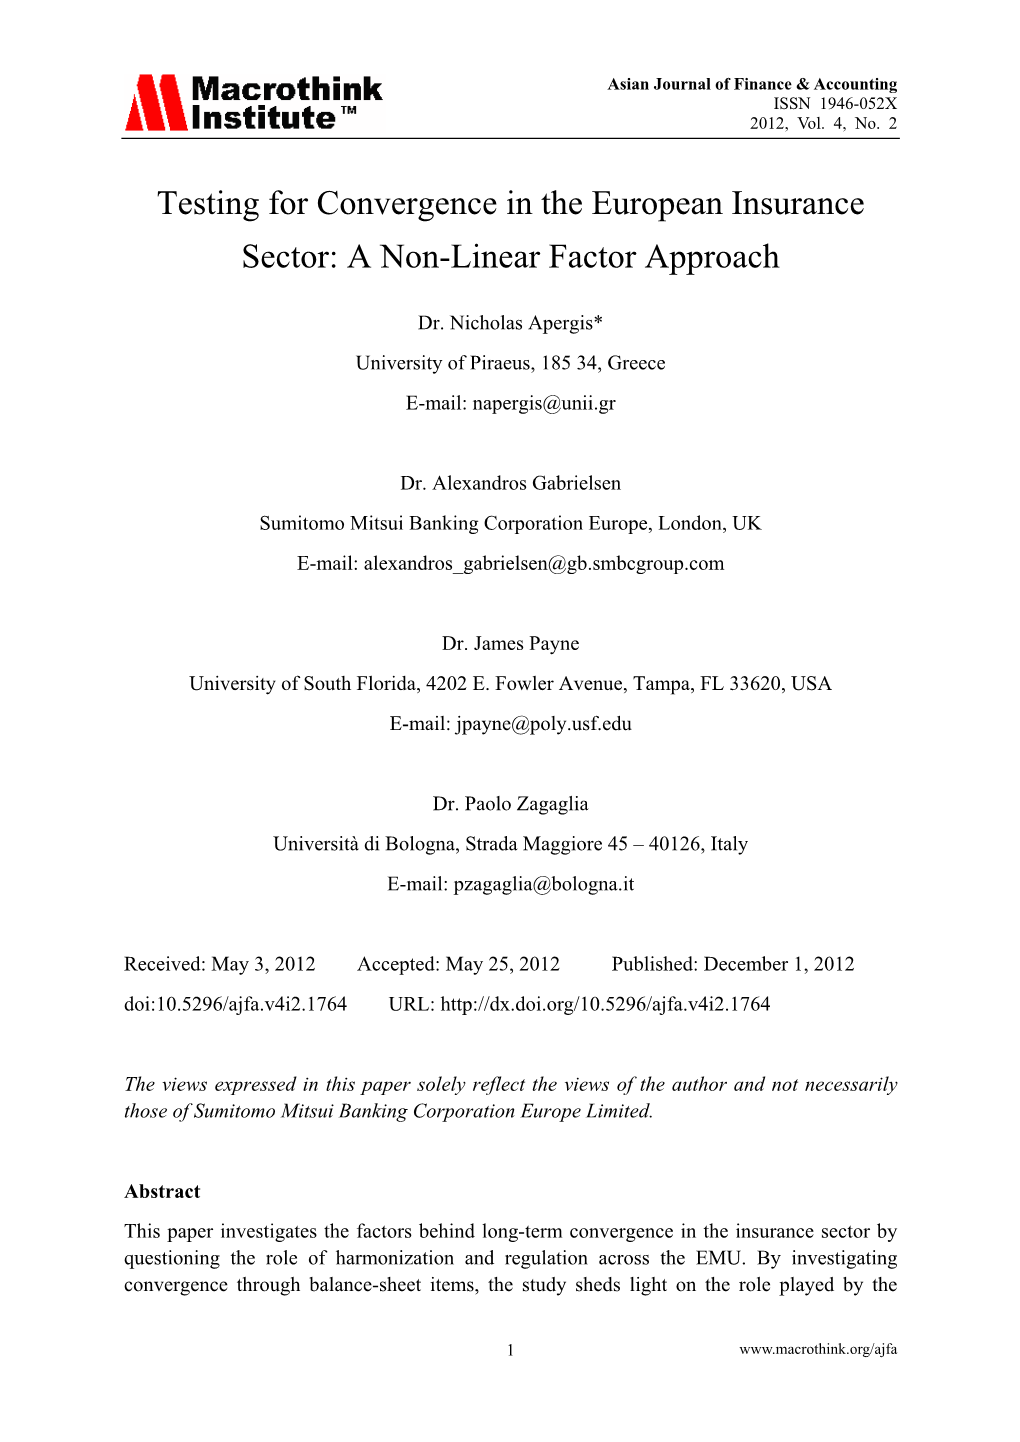 Testing for Convergence in the European Insurance Sector: a Non-Linear Factor Approach